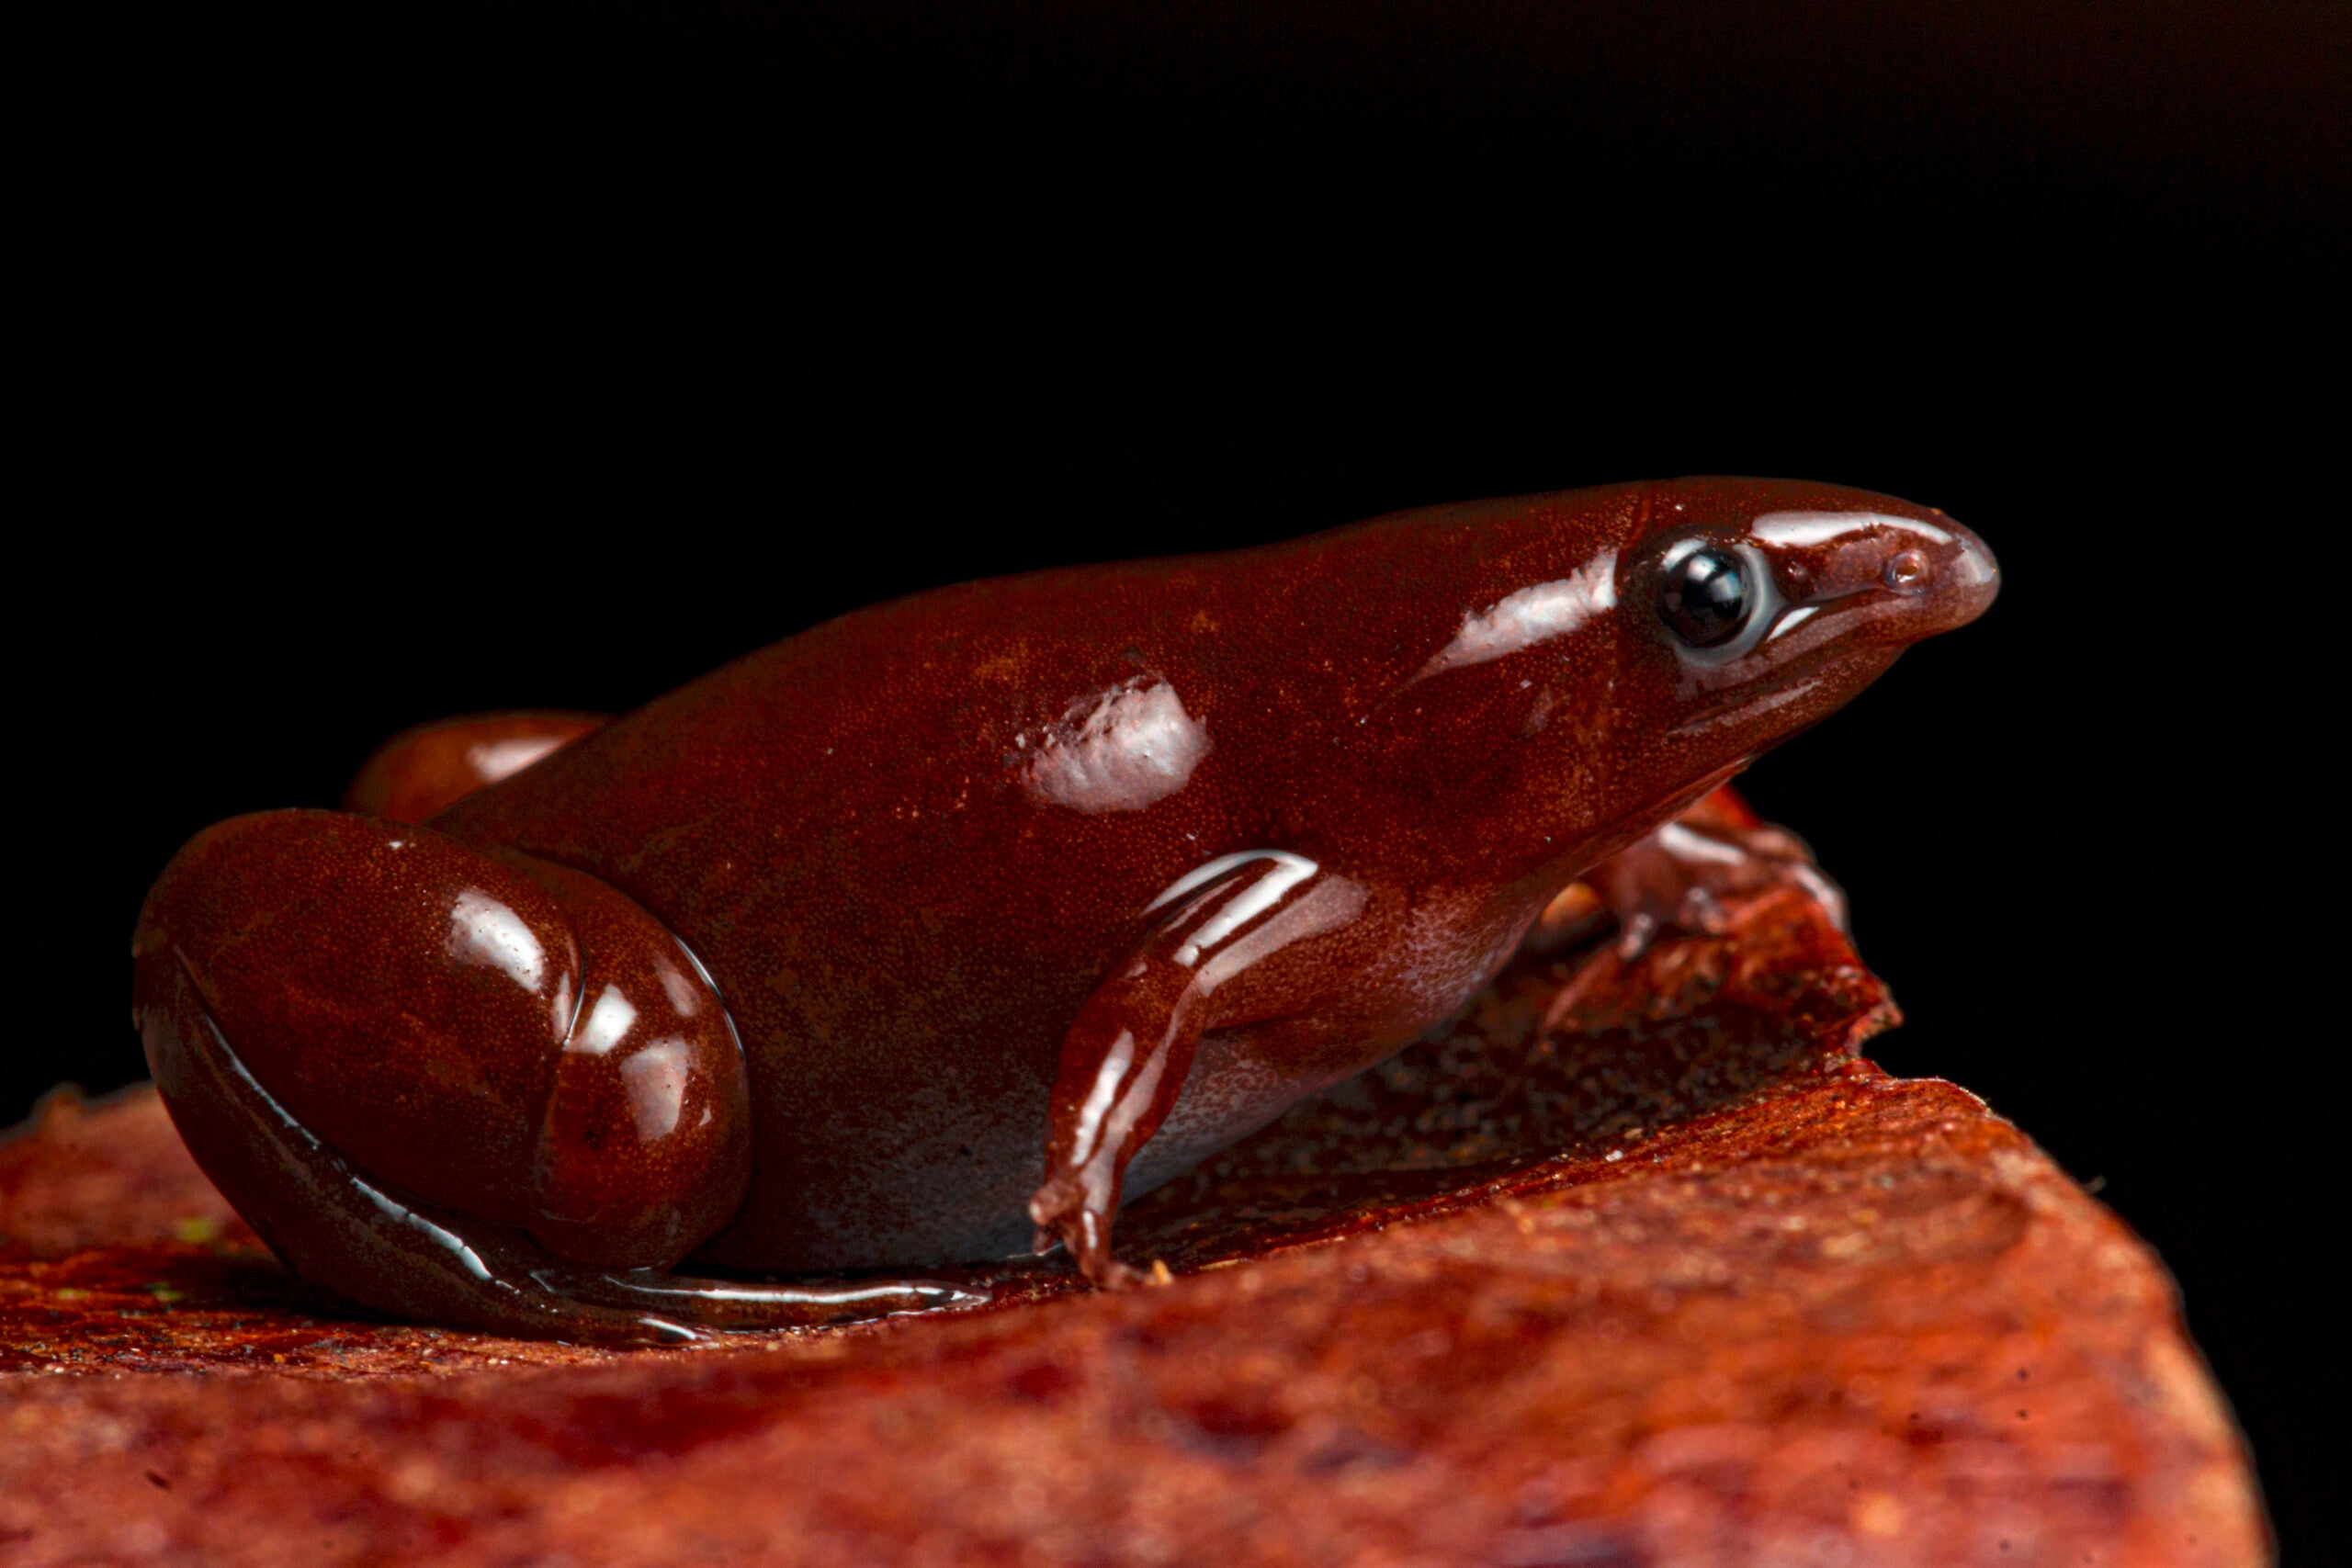 The newly discovered tapir frog has a magnificent snout | Popular Science